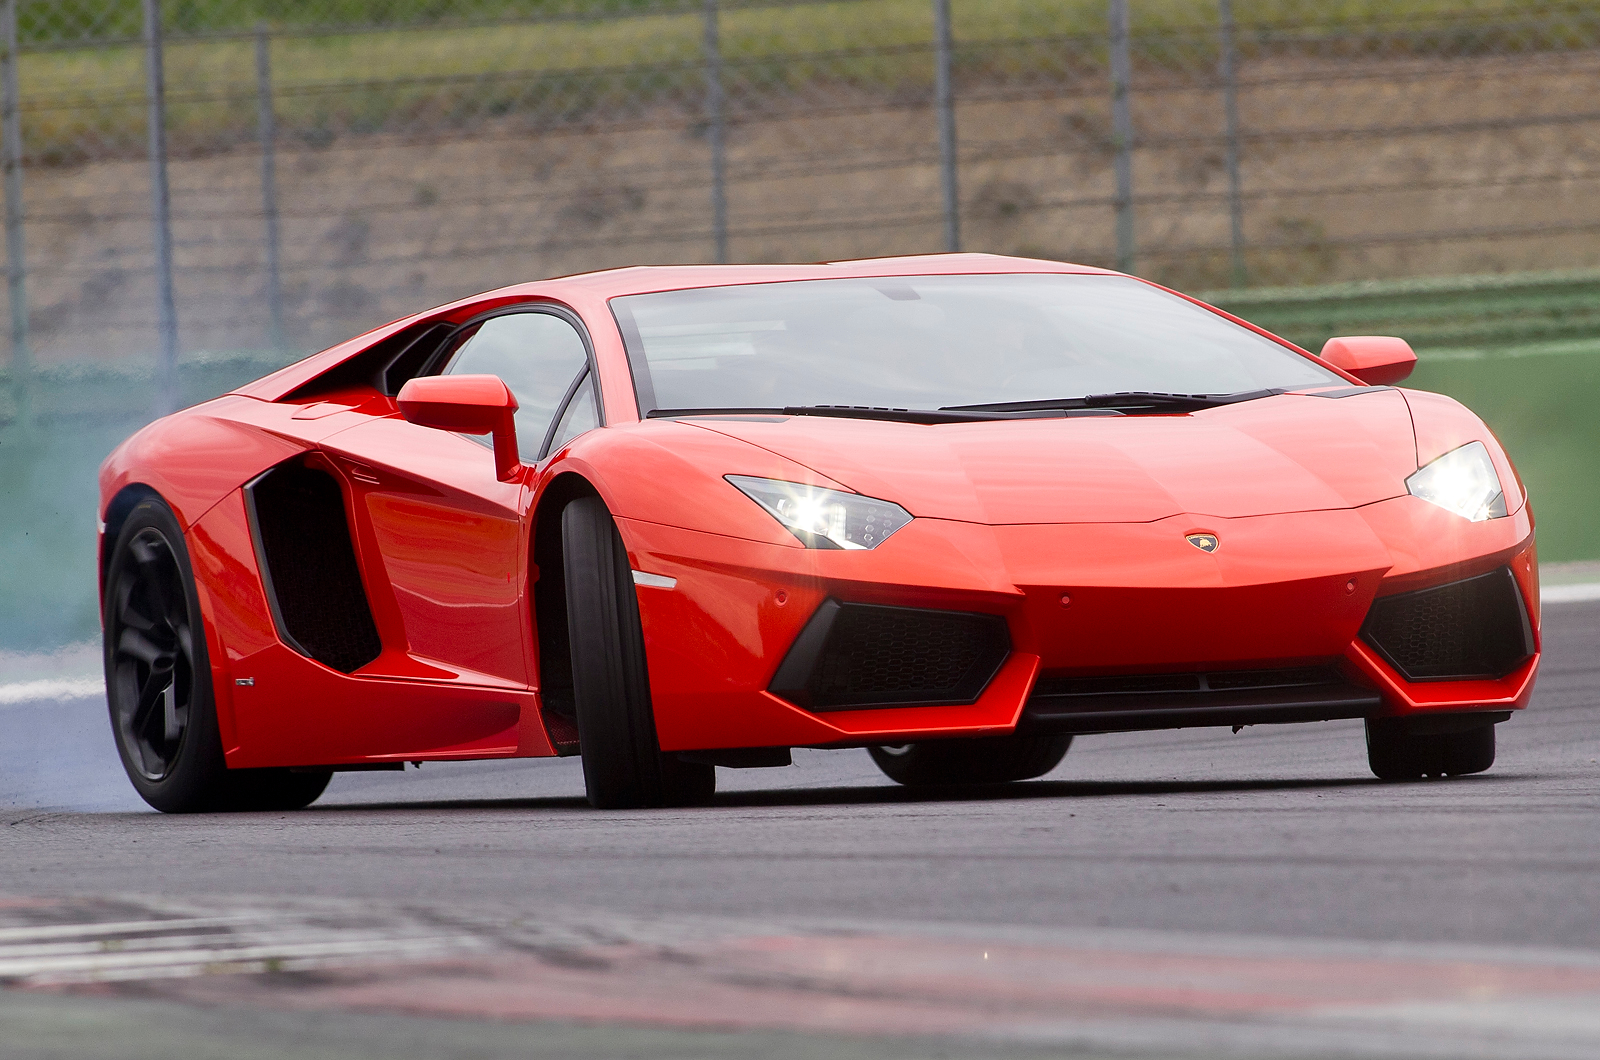 <p>Every Aventador comes with Lamborghini’s 6.5-liter <strong>V12</strong> engine. The 6498cc motor does without turbo- or supercharging, relying instead on capacity for its <strong>prodigious</strong> power output that can range up to <strong>770 hp </strong>in the <strong>SVJ</strong> model.</p><p>This is only Lamborghini’s second V12 engine design, the first used in the 350GT and it lasted all the way into the Murcielago. The Aventador’s 60-degree V12 was all-new for this model and is known by its codename, L539. It uses a <strong>different</strong> firing order to the original Giotto Bizzarrini-designed unit, but the newer motor can rev more <strong>freely</strong> and has variable valve timing.</p>